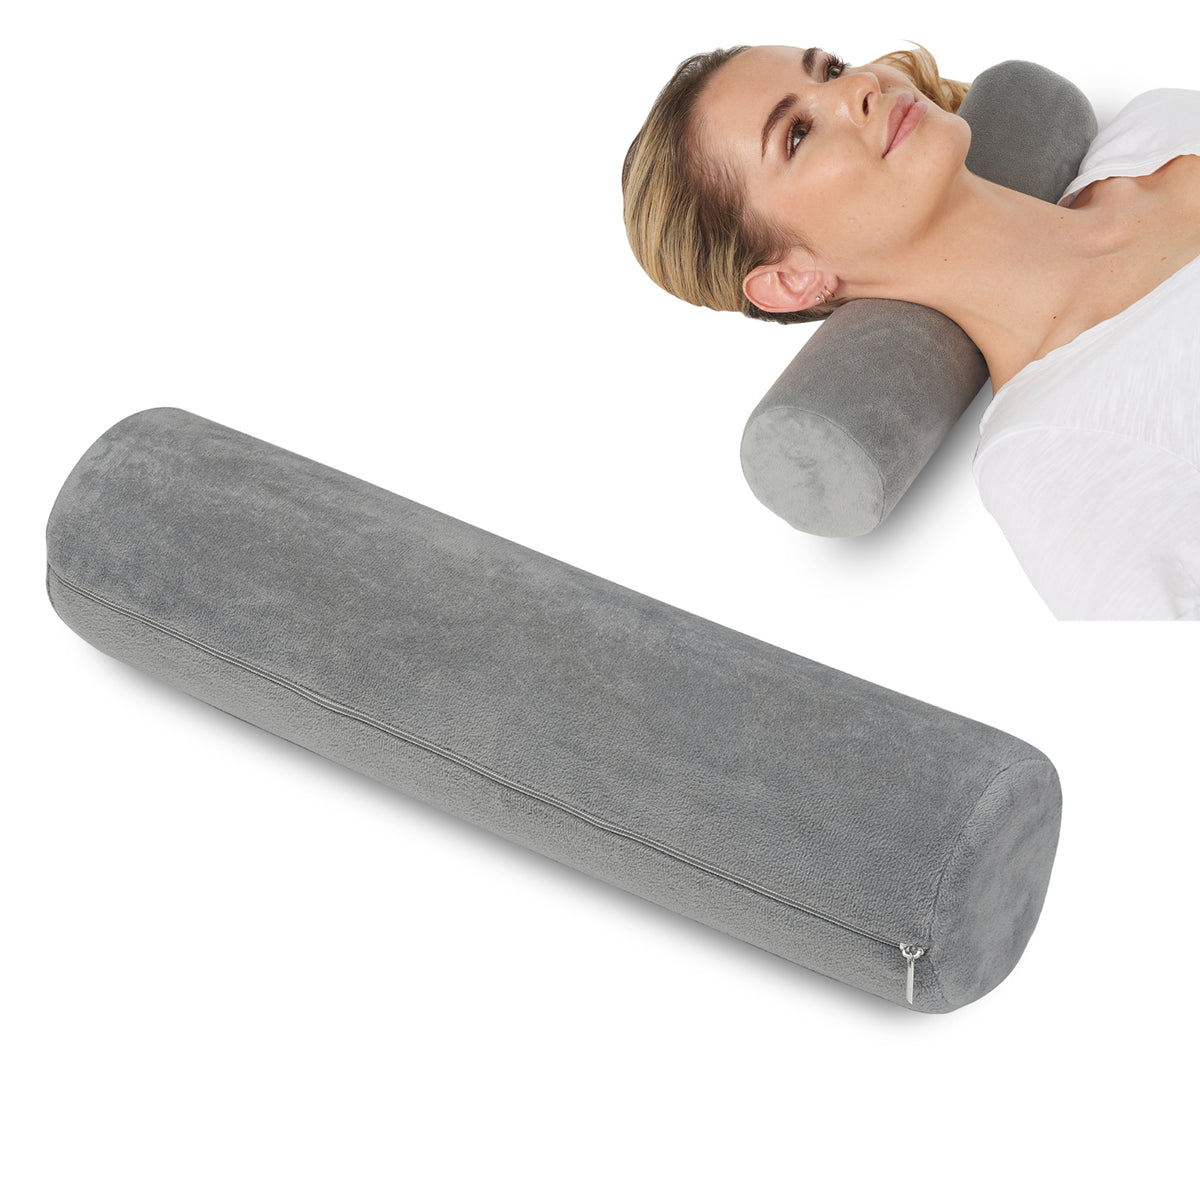 ZHCHG Cervical Neck Roll Pillow- Memory Foam Cylinder Pillow for Sleeping,  Round Pillow for Neck, Spine Discomfort, Knees and Yoga- Washable Cover  Dark Grey Small